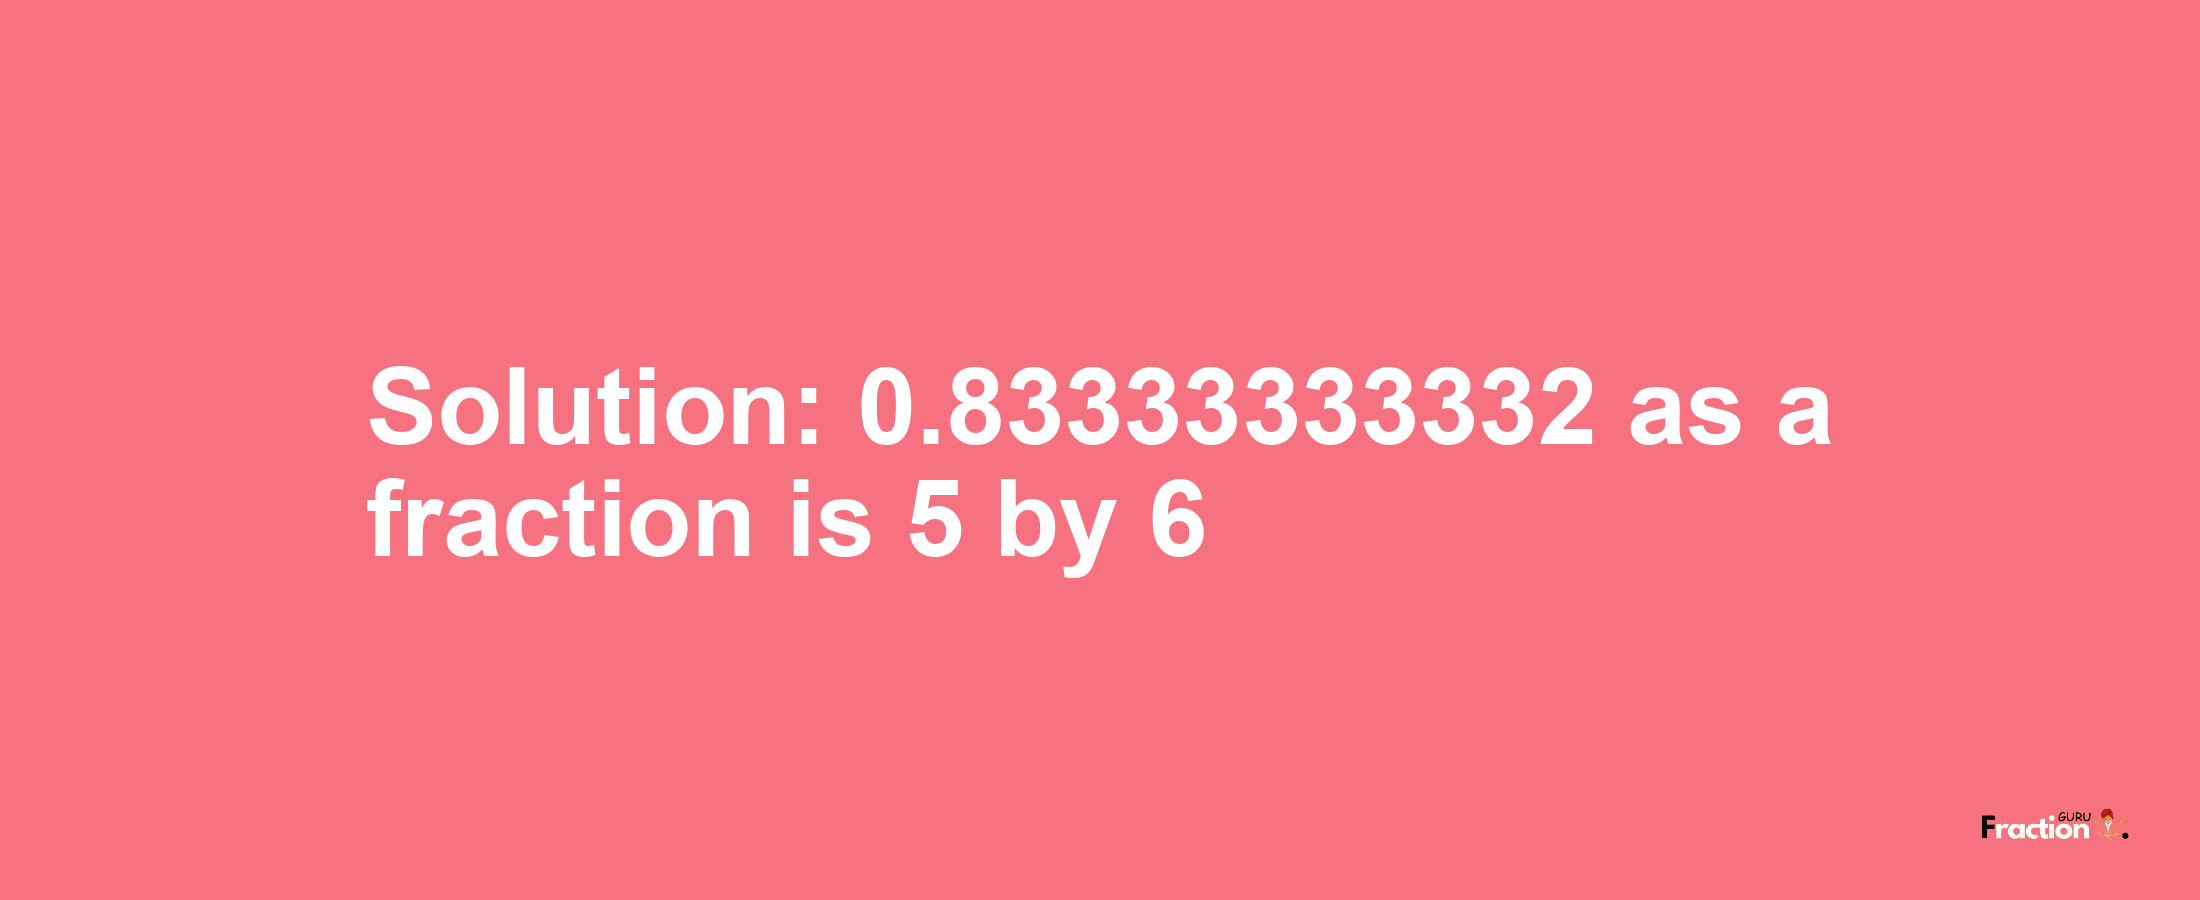 Solution:0.83333333332 as a fraction is 5/6